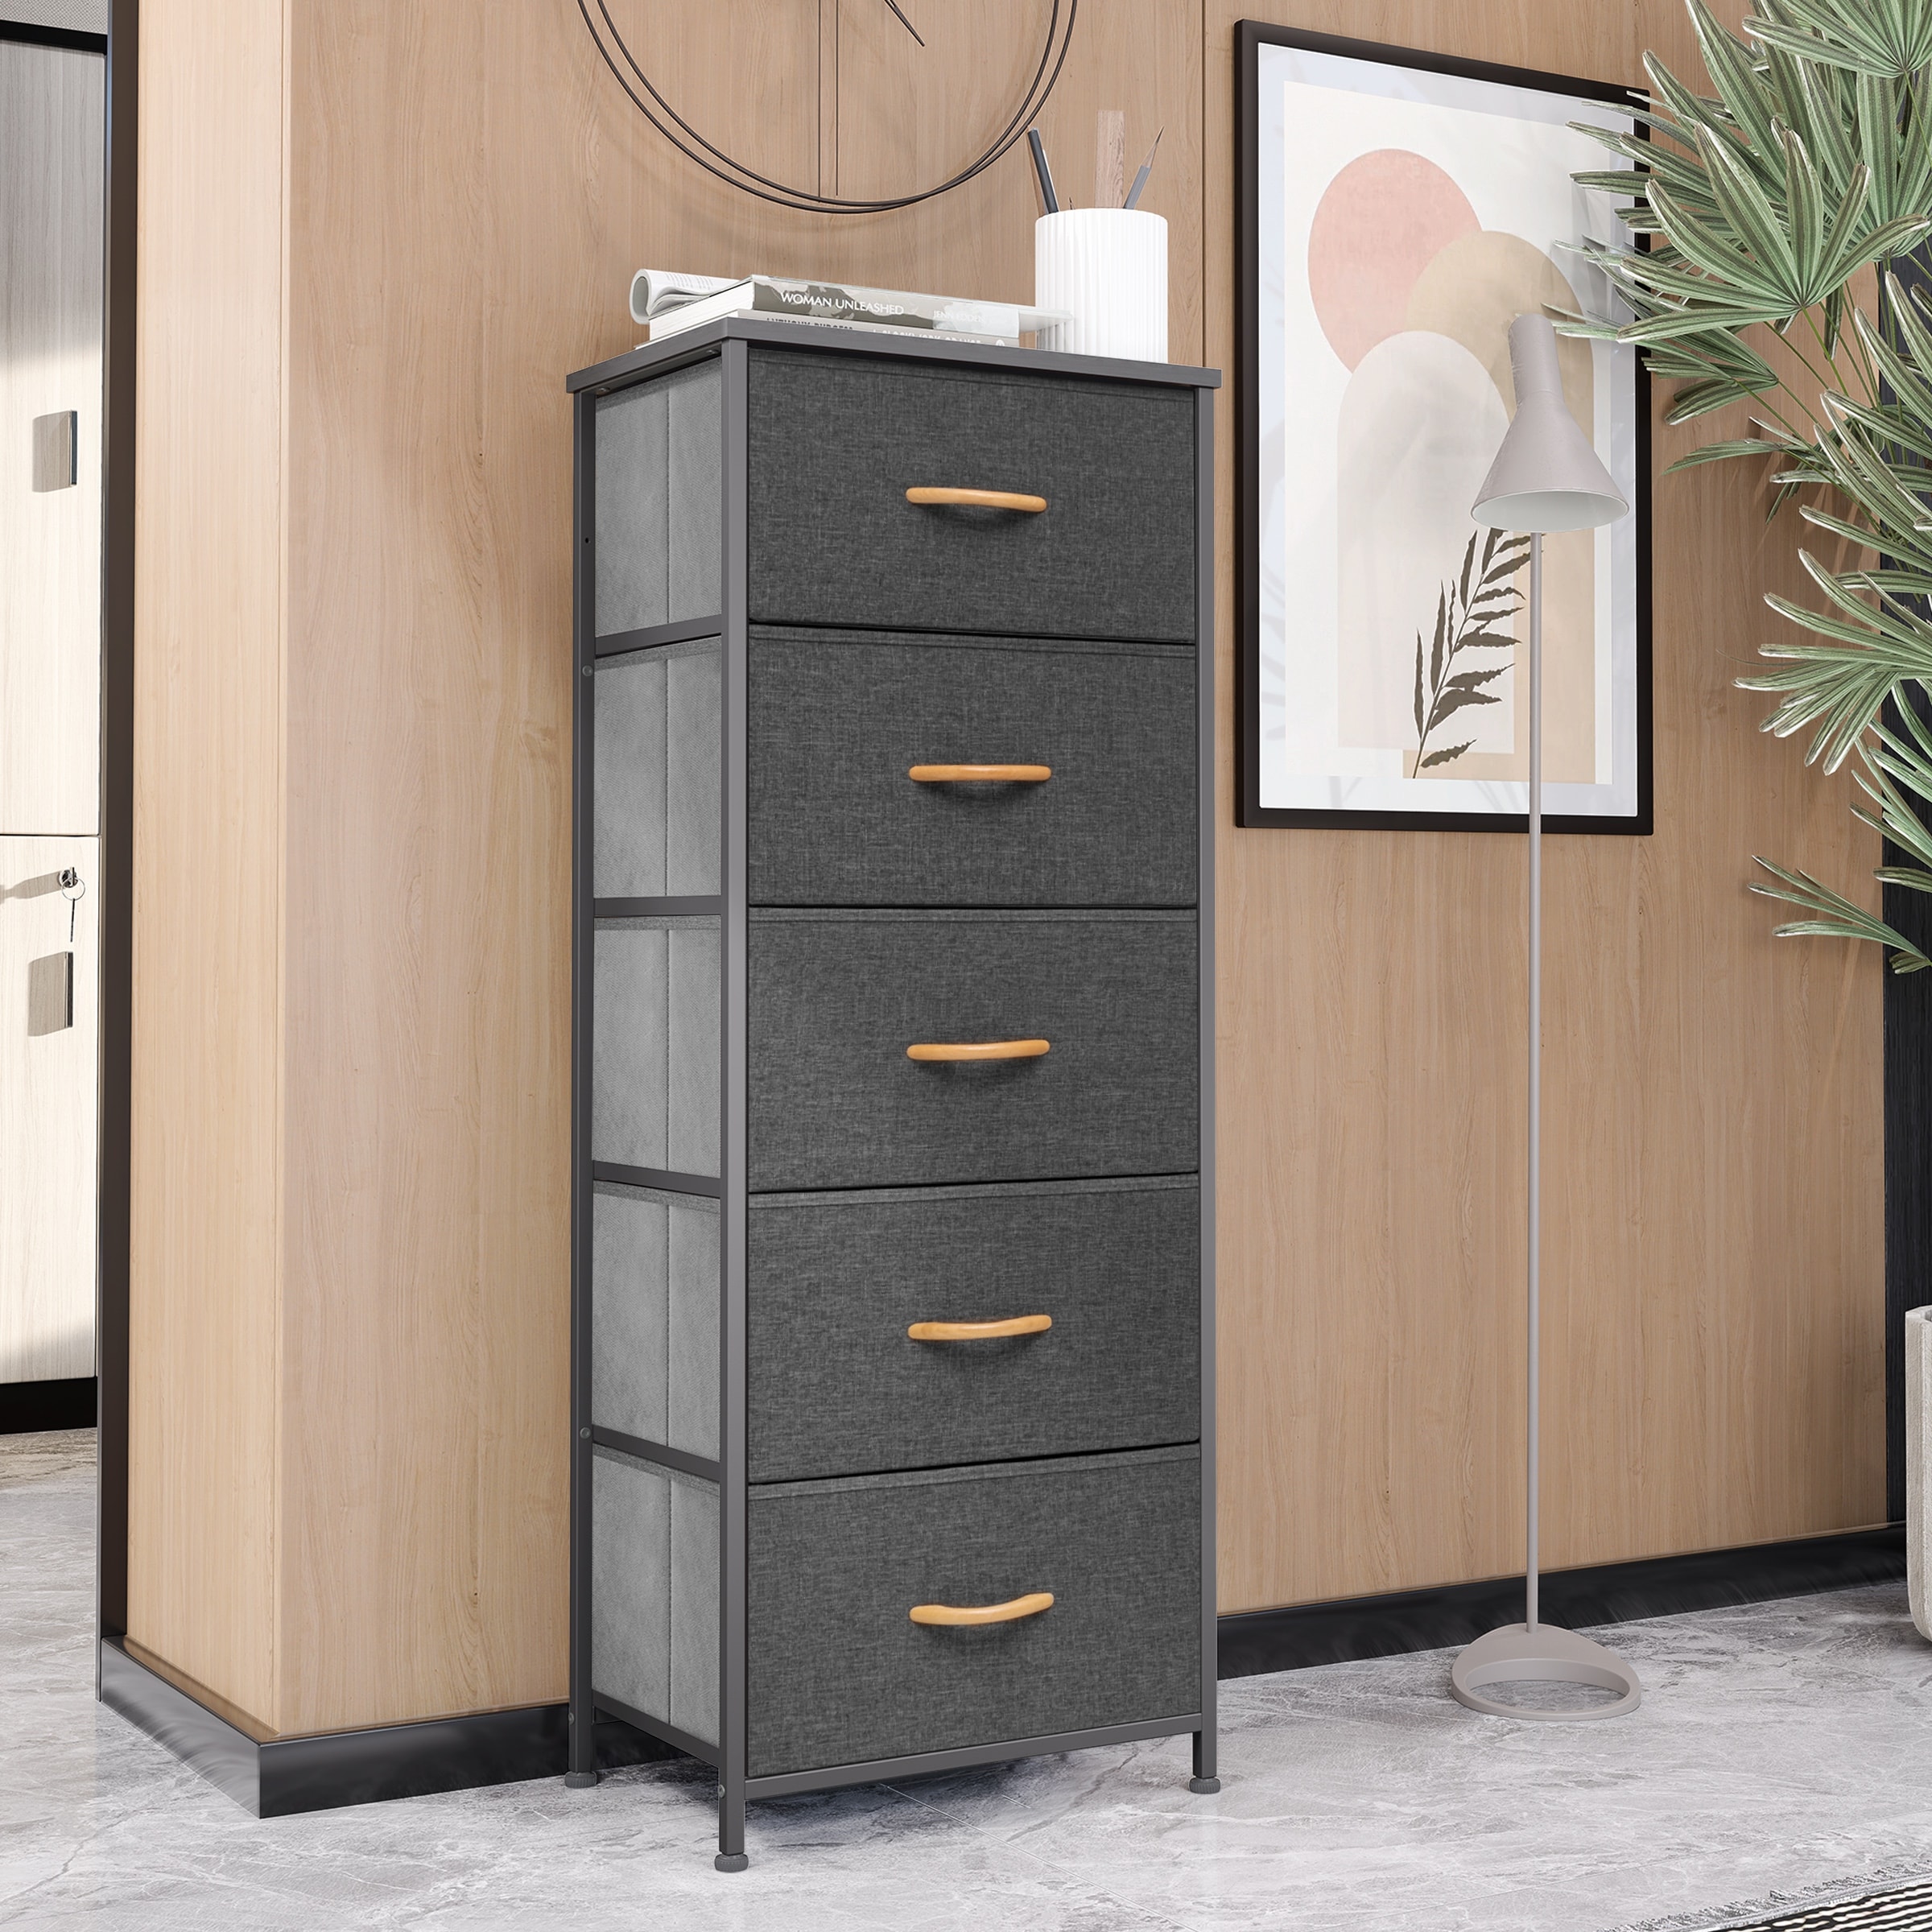 https://ak1.ostkcdn.com/images/products/is/images/direct/4956bb6358a69d6c4d0fb2fe87e6eceeefa9abab/VredHom-5-Drawers-Vertical-Dresser-Storage-Tower.jpg